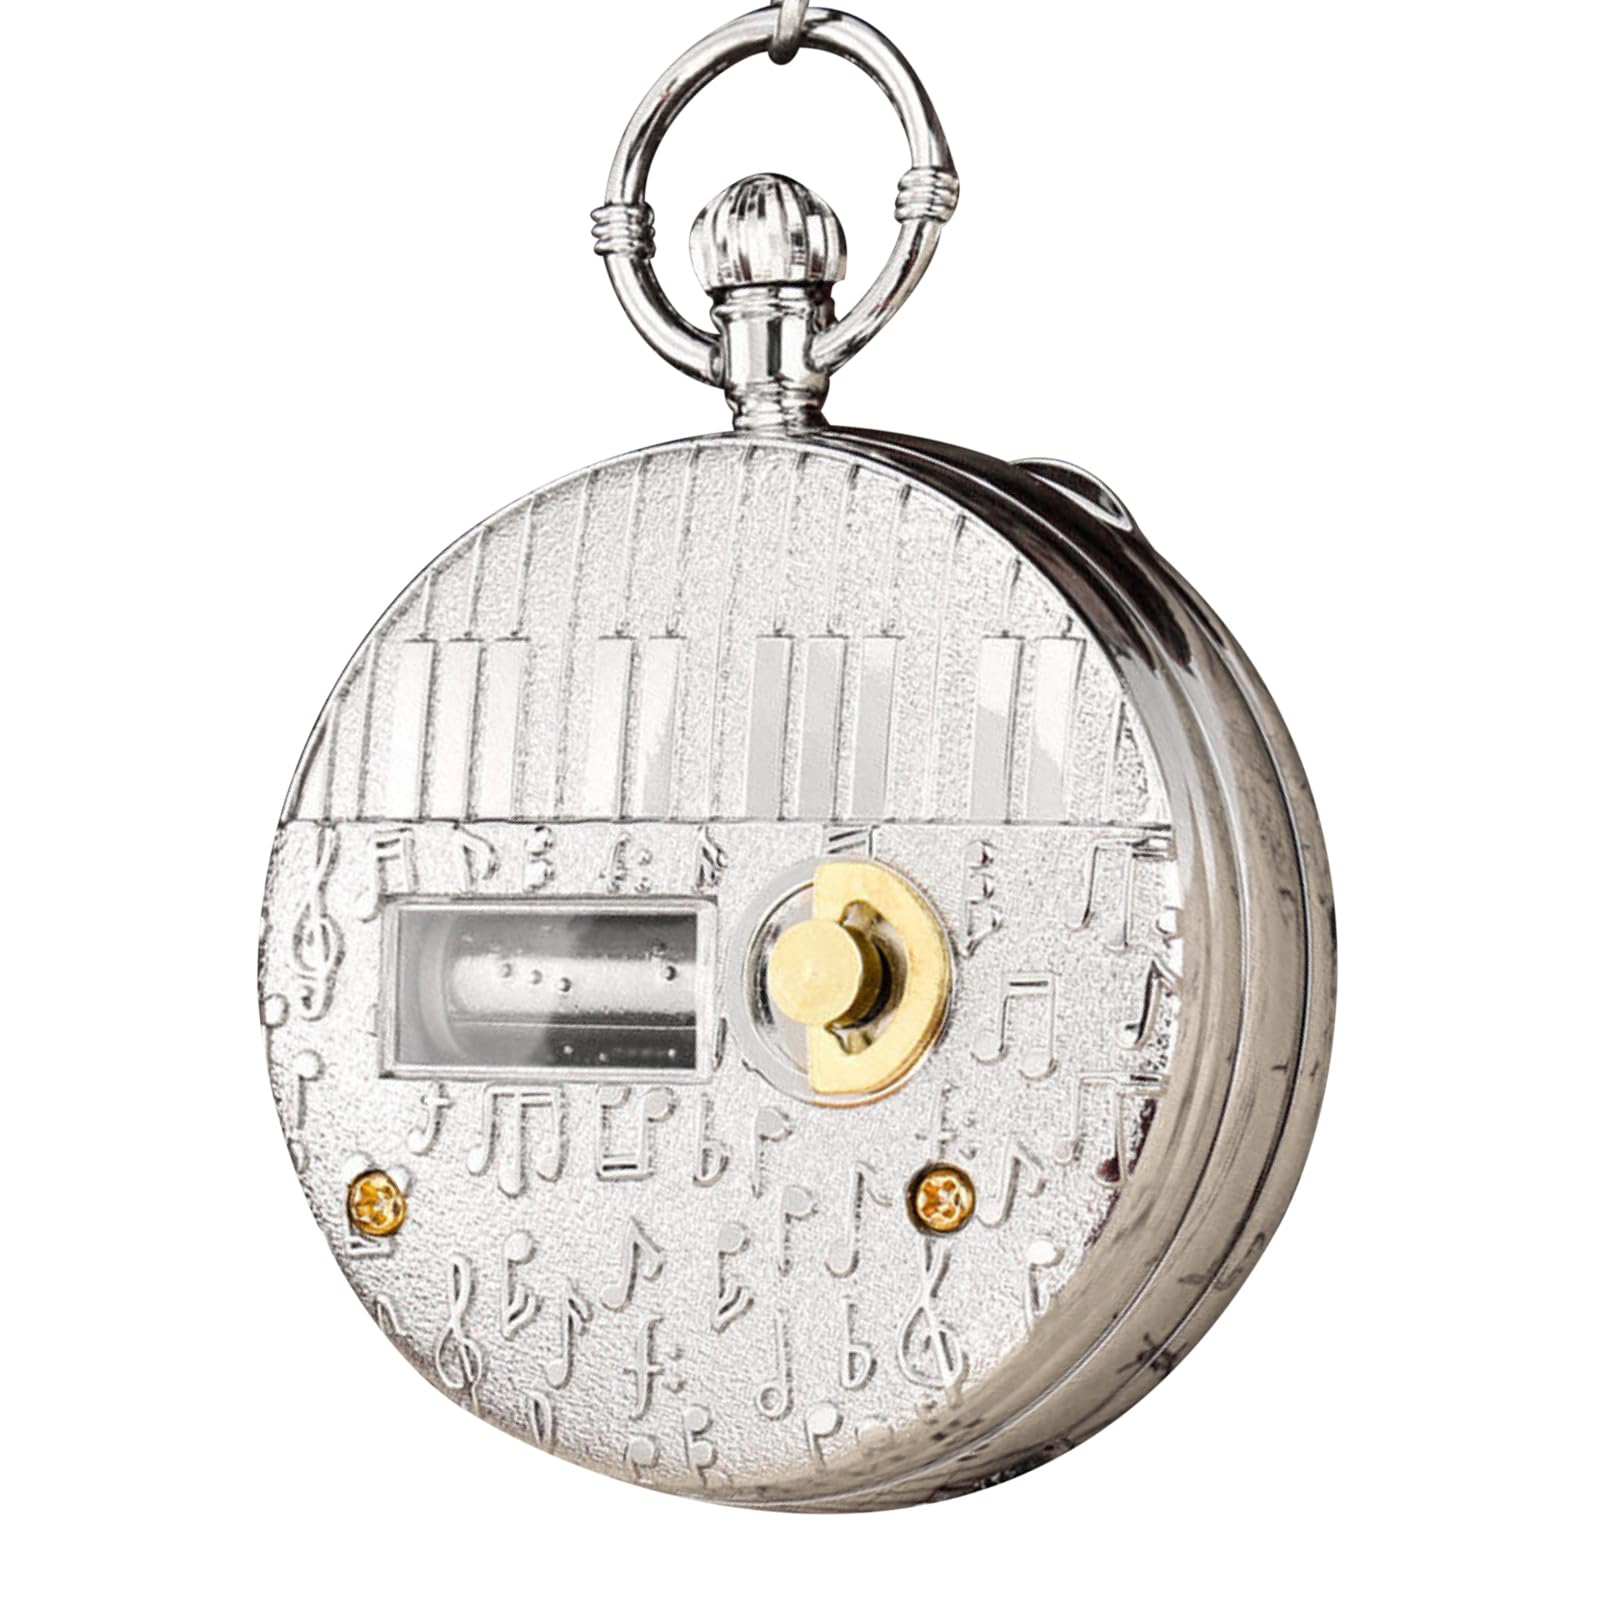 MOOKEENONE Pocket Watch with Music Box, Musical Movement Pocket Watch with Chain, Railroad Train Design Shell